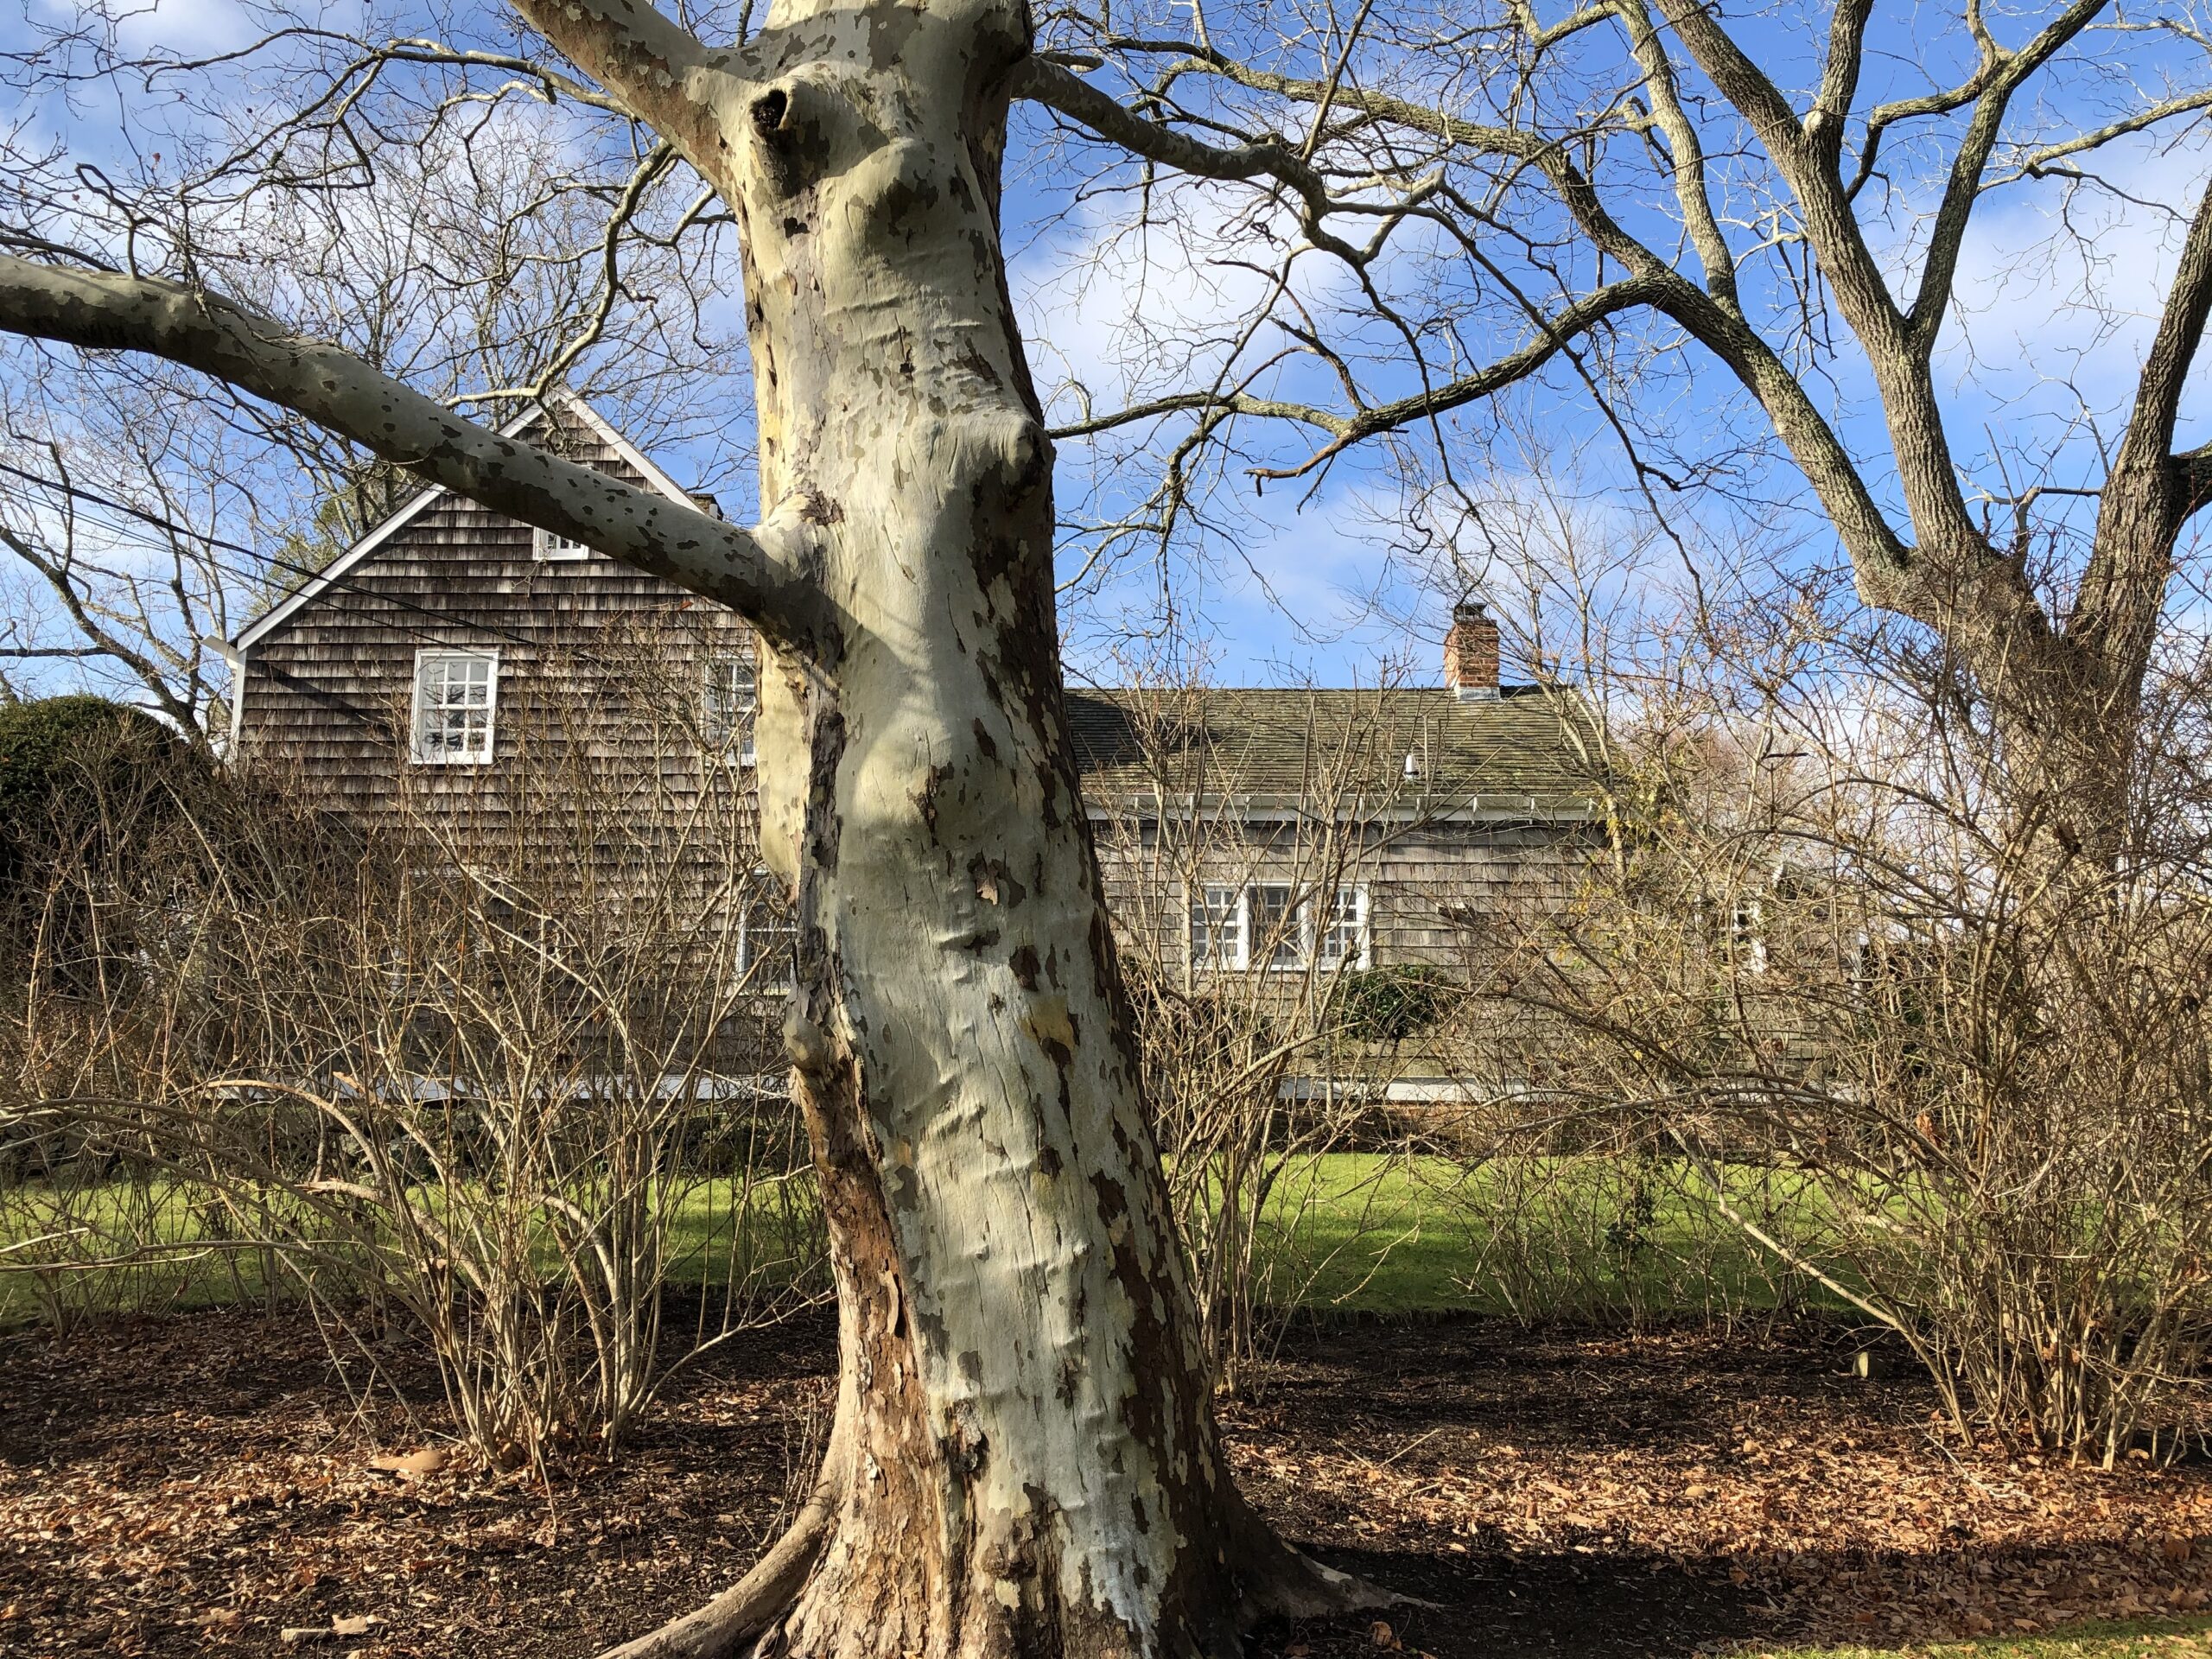 A view from Ocean Road of the John Sandford House in Bridgehampton. The saltbox style house, built in 1745, was taken apart by its current owner, but whether it will be rebuilt is unknown. COURTESY ANN SANDFORD